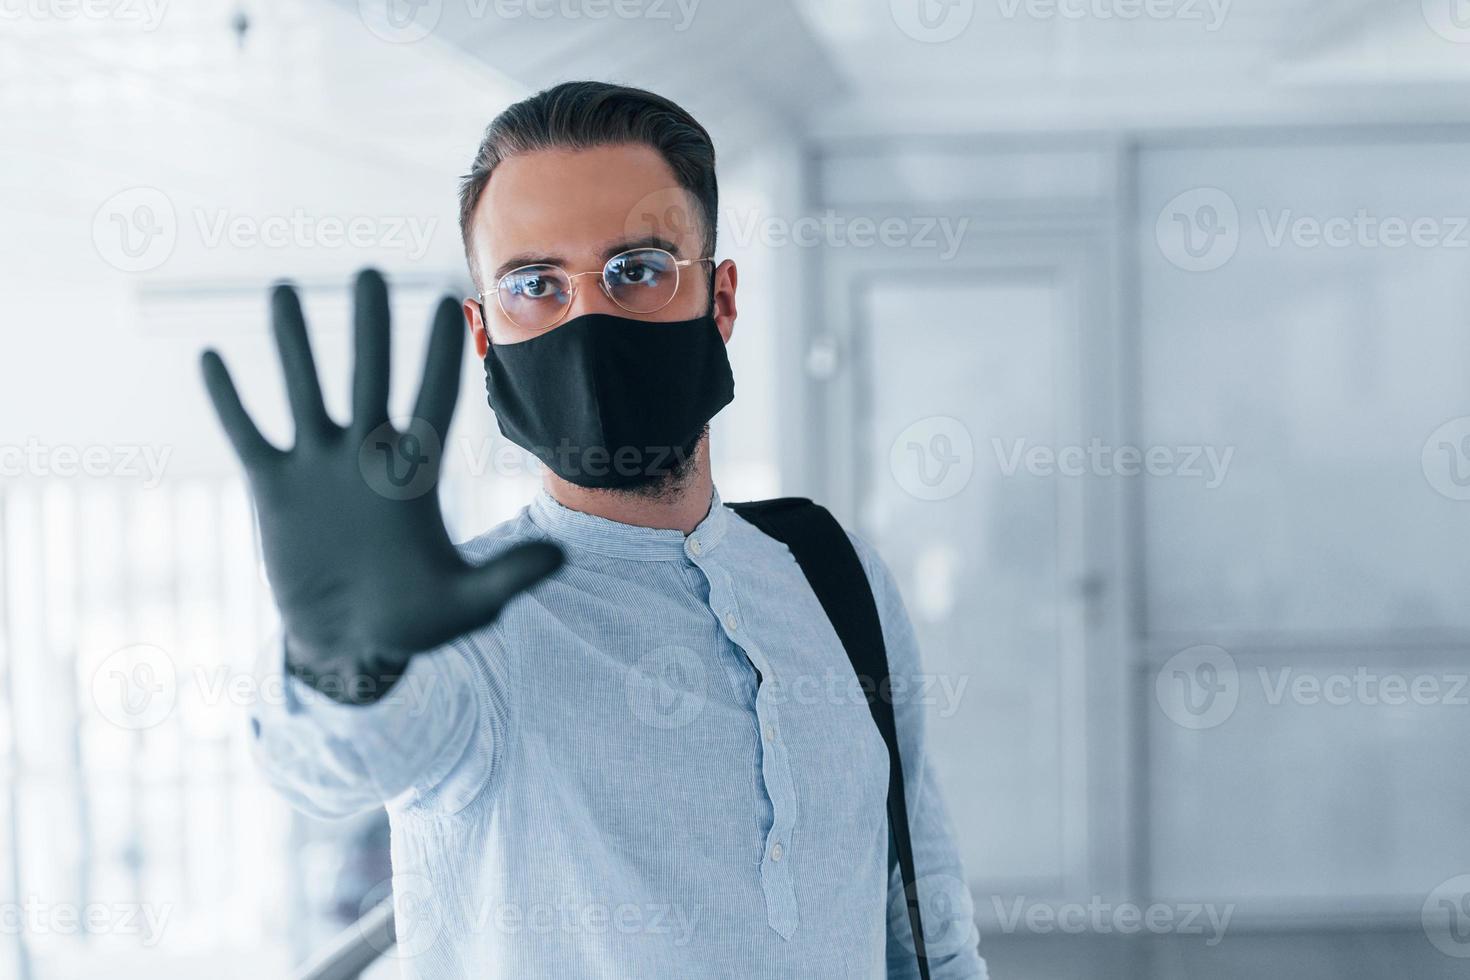 Showing stop gesture by hand. In protective mask and gloves. Young handsome man in formal clothes indoors in the office at daytime photo